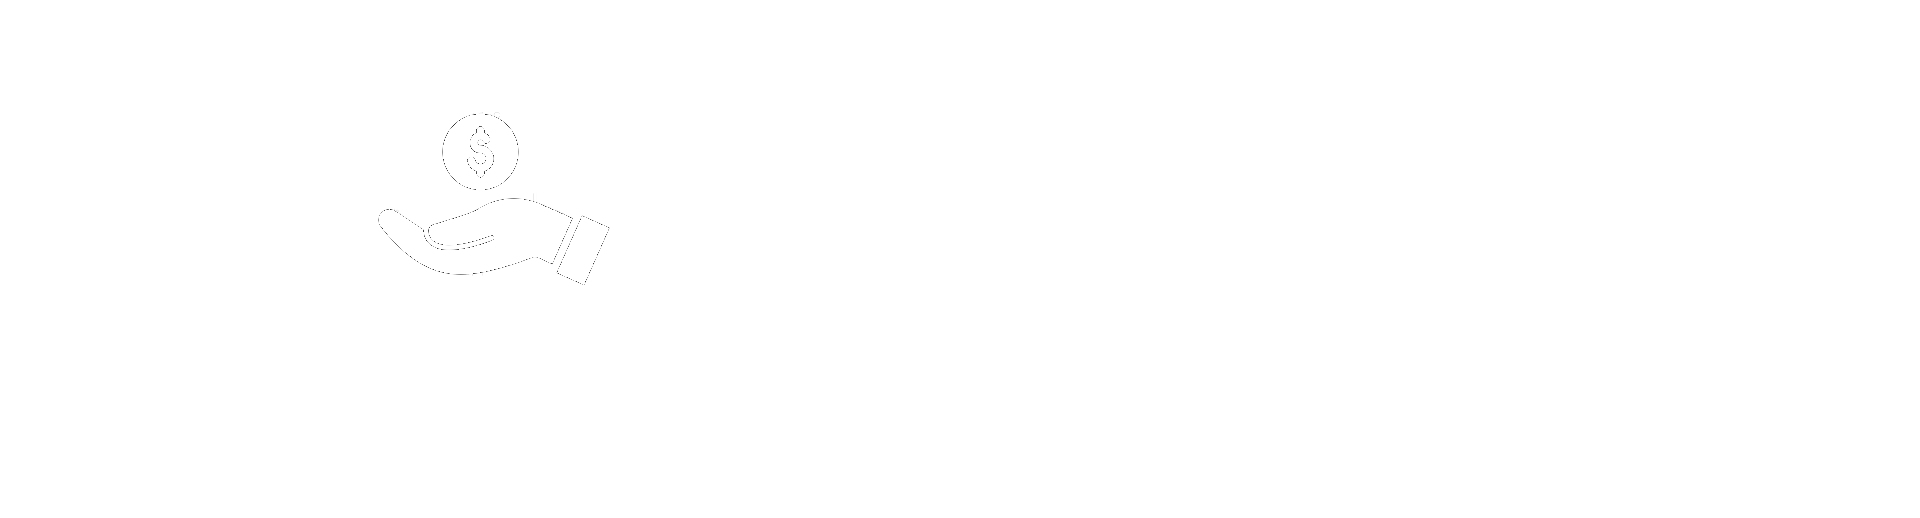 DONATE - give HOPE back to our warriors